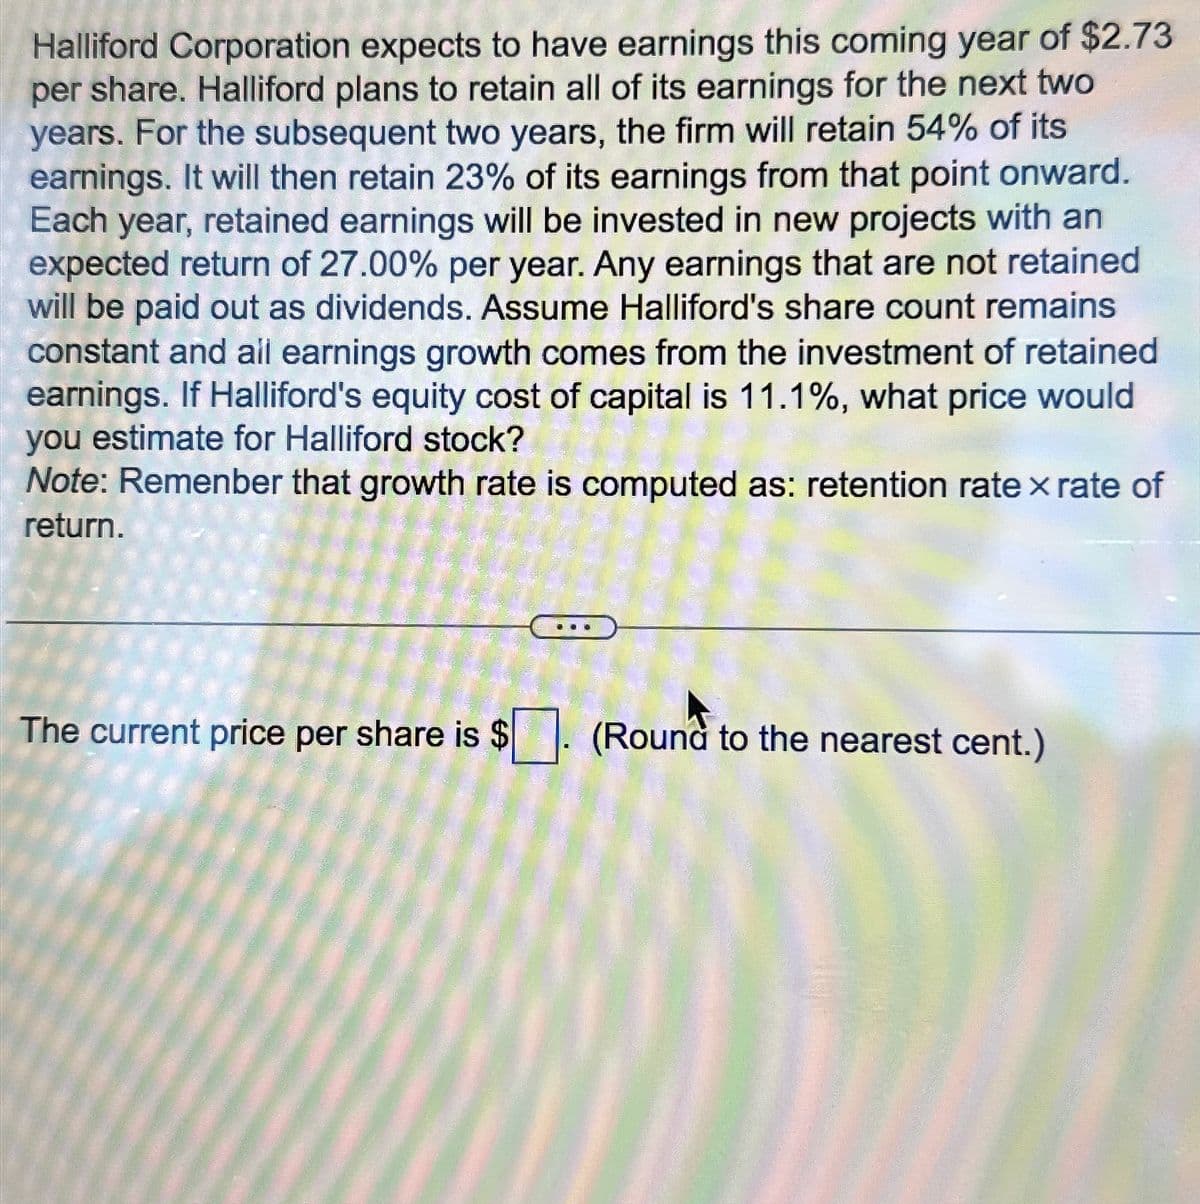 Halliford Corporation expects to have earnings this coming year of $2.73
per share. Halliford plans to retain all of its earnings for the next two
years. For the subsequent two years, the firm will retain 54% of its
earnings. It will then retain 23% of its earnings from that point onward.
Each year, retained earnings will be invested in new projects with an
expected return of 27.00% per year. Any earnings that are not retained
will be paid out as dividends. Assume Halliford's share count remains
constant and all earnings growth comes from the investment of retained
earnings. If Halliford's equity cost of capital is 11.1%, what price would
you estimate for Halliford stock?
Note: Remenber that growth rate is computed as: retention rate × rate of
return.
The current price per share is $
(Round to the nearest cent.)